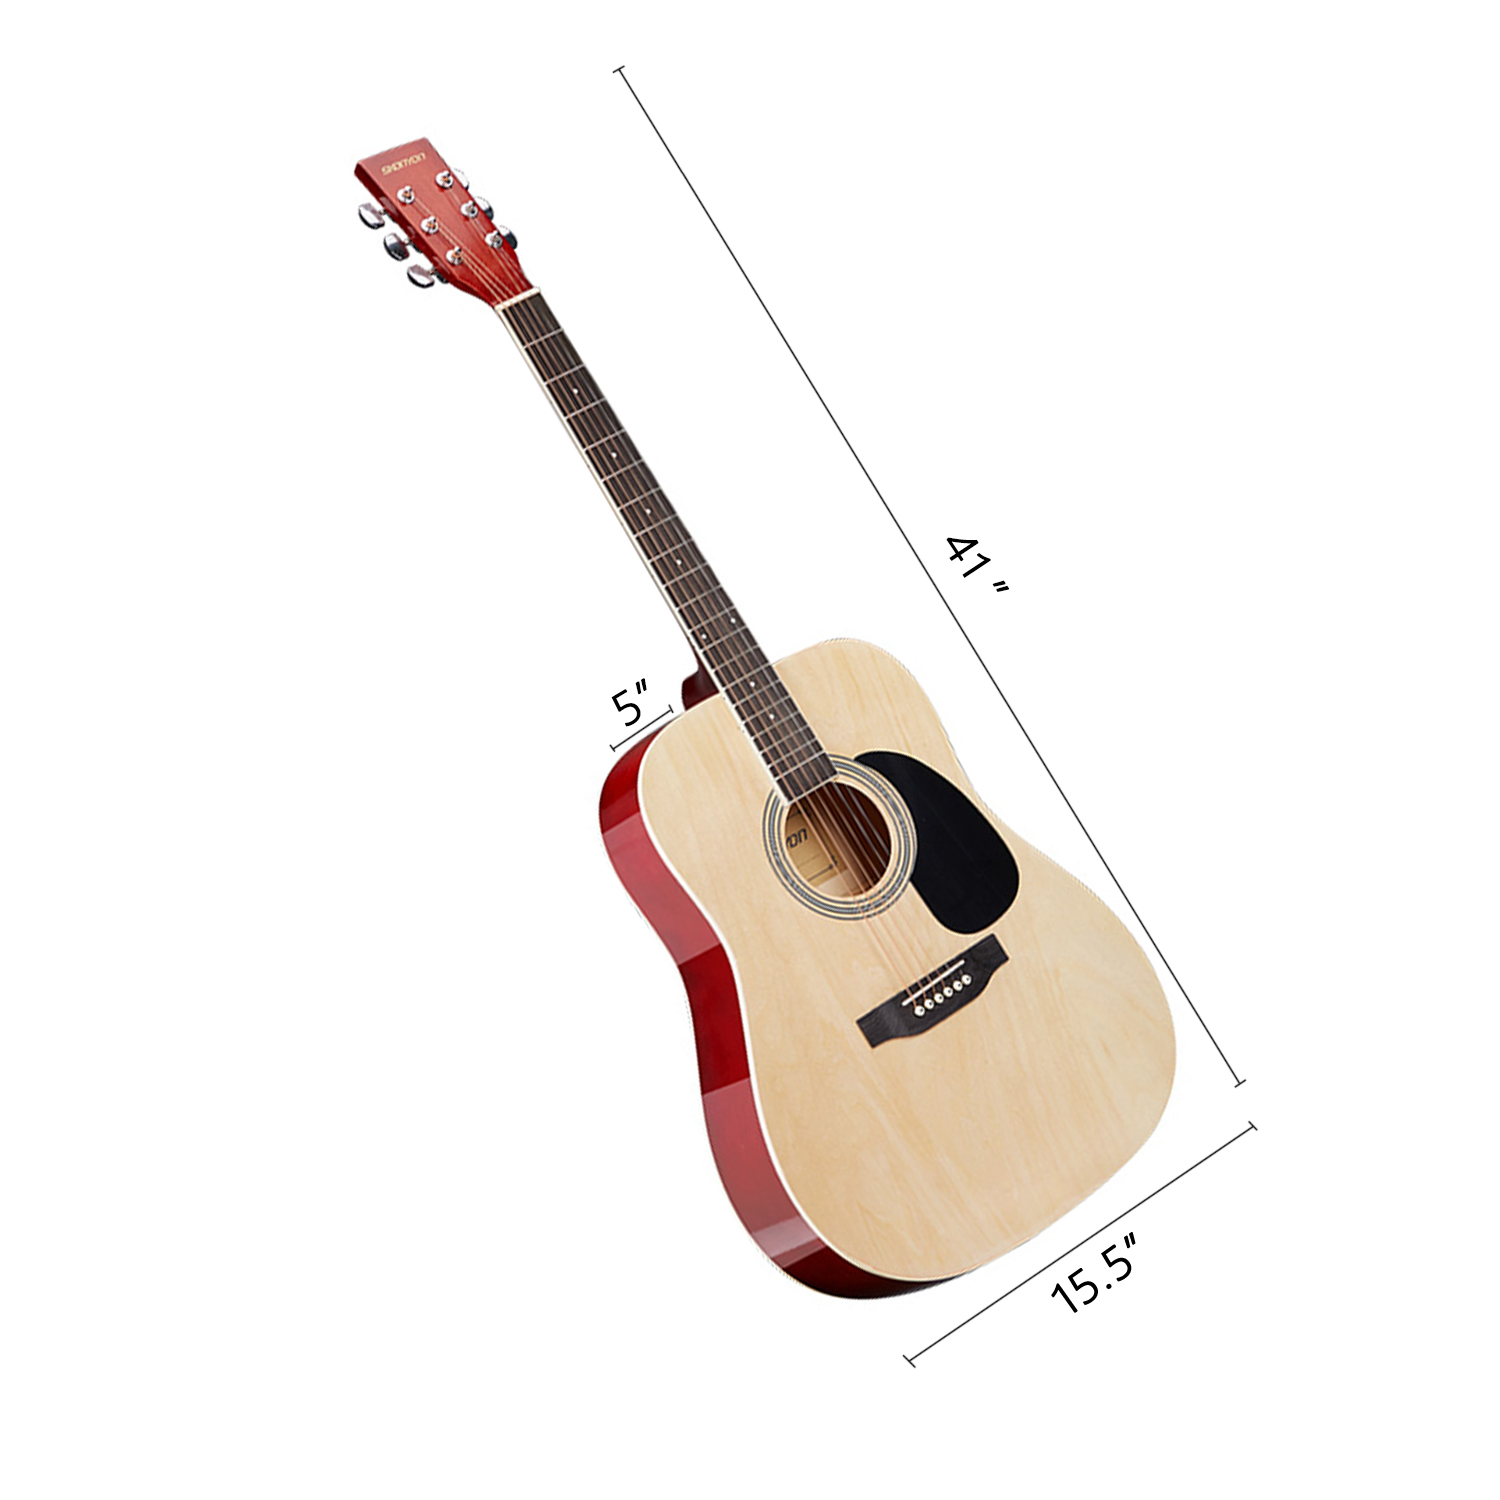 YouYeap 41" All-Wood Acoustic Guitar Starter Level Kit with Gig Bag, E-Tuner, Pick, Strap and Rag, Natural - image 4 of 11